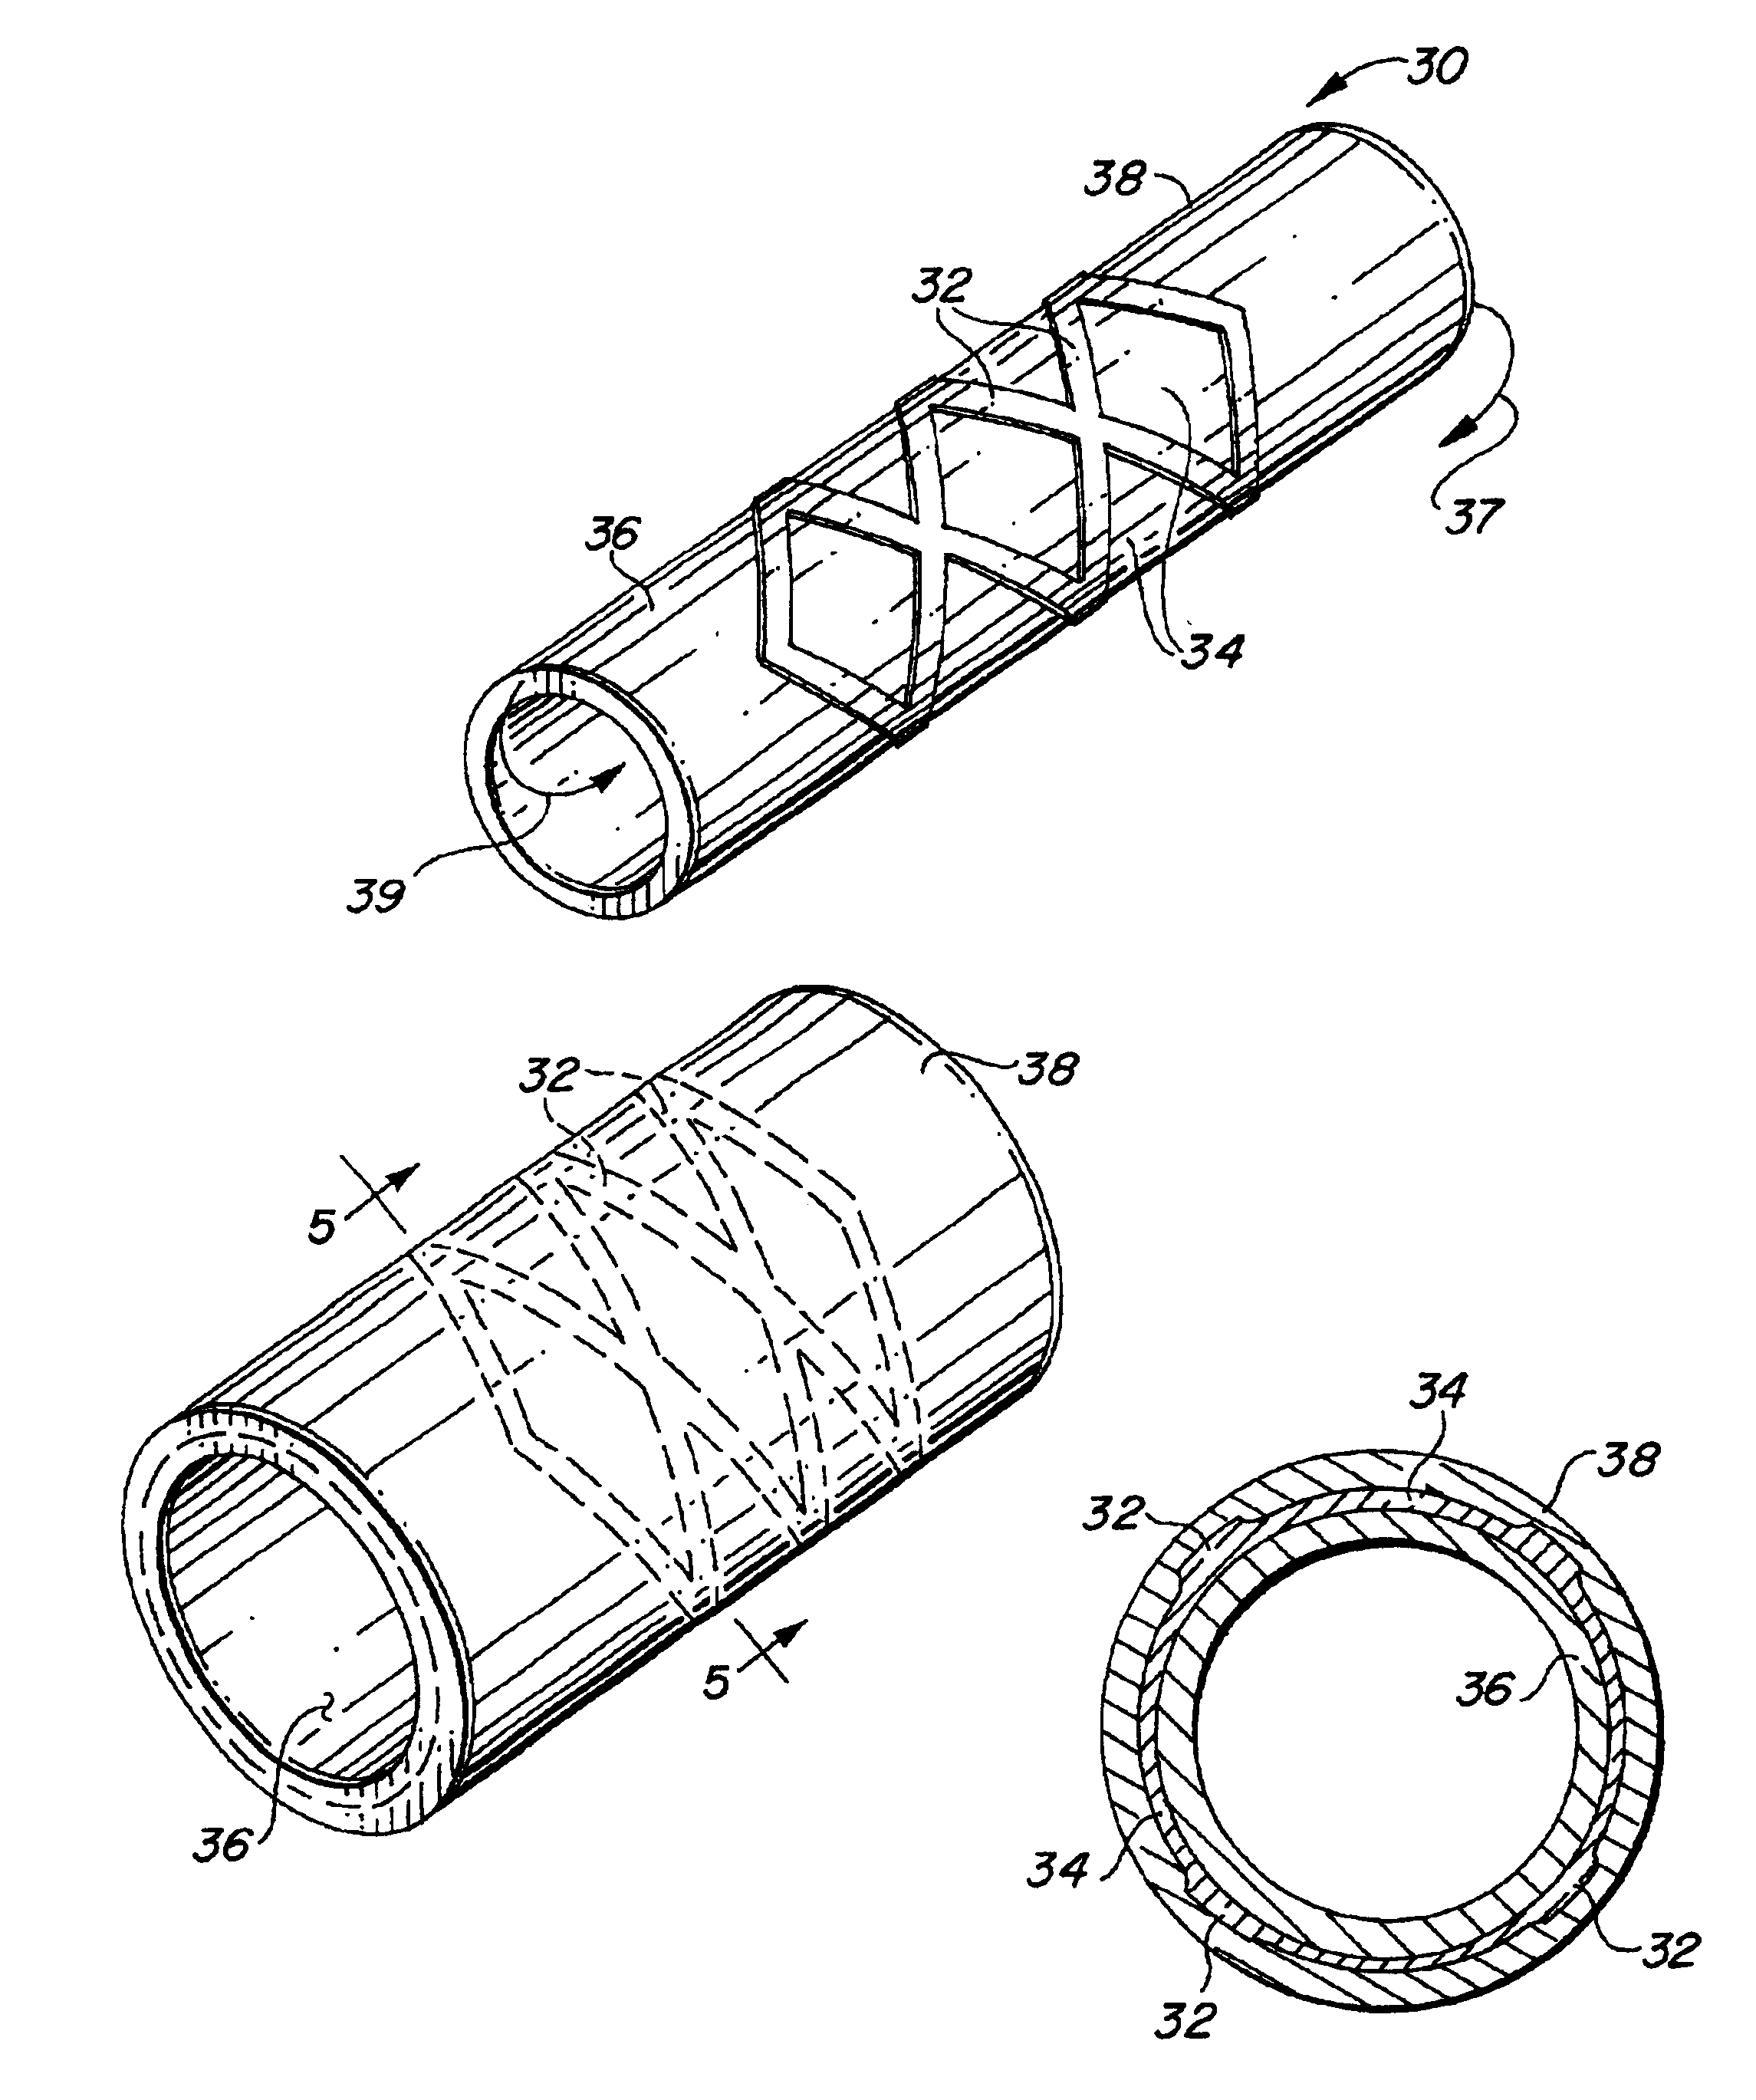 Self-supporting laminated films, structural materials and medical devices manufactured therefrom and methods of making same